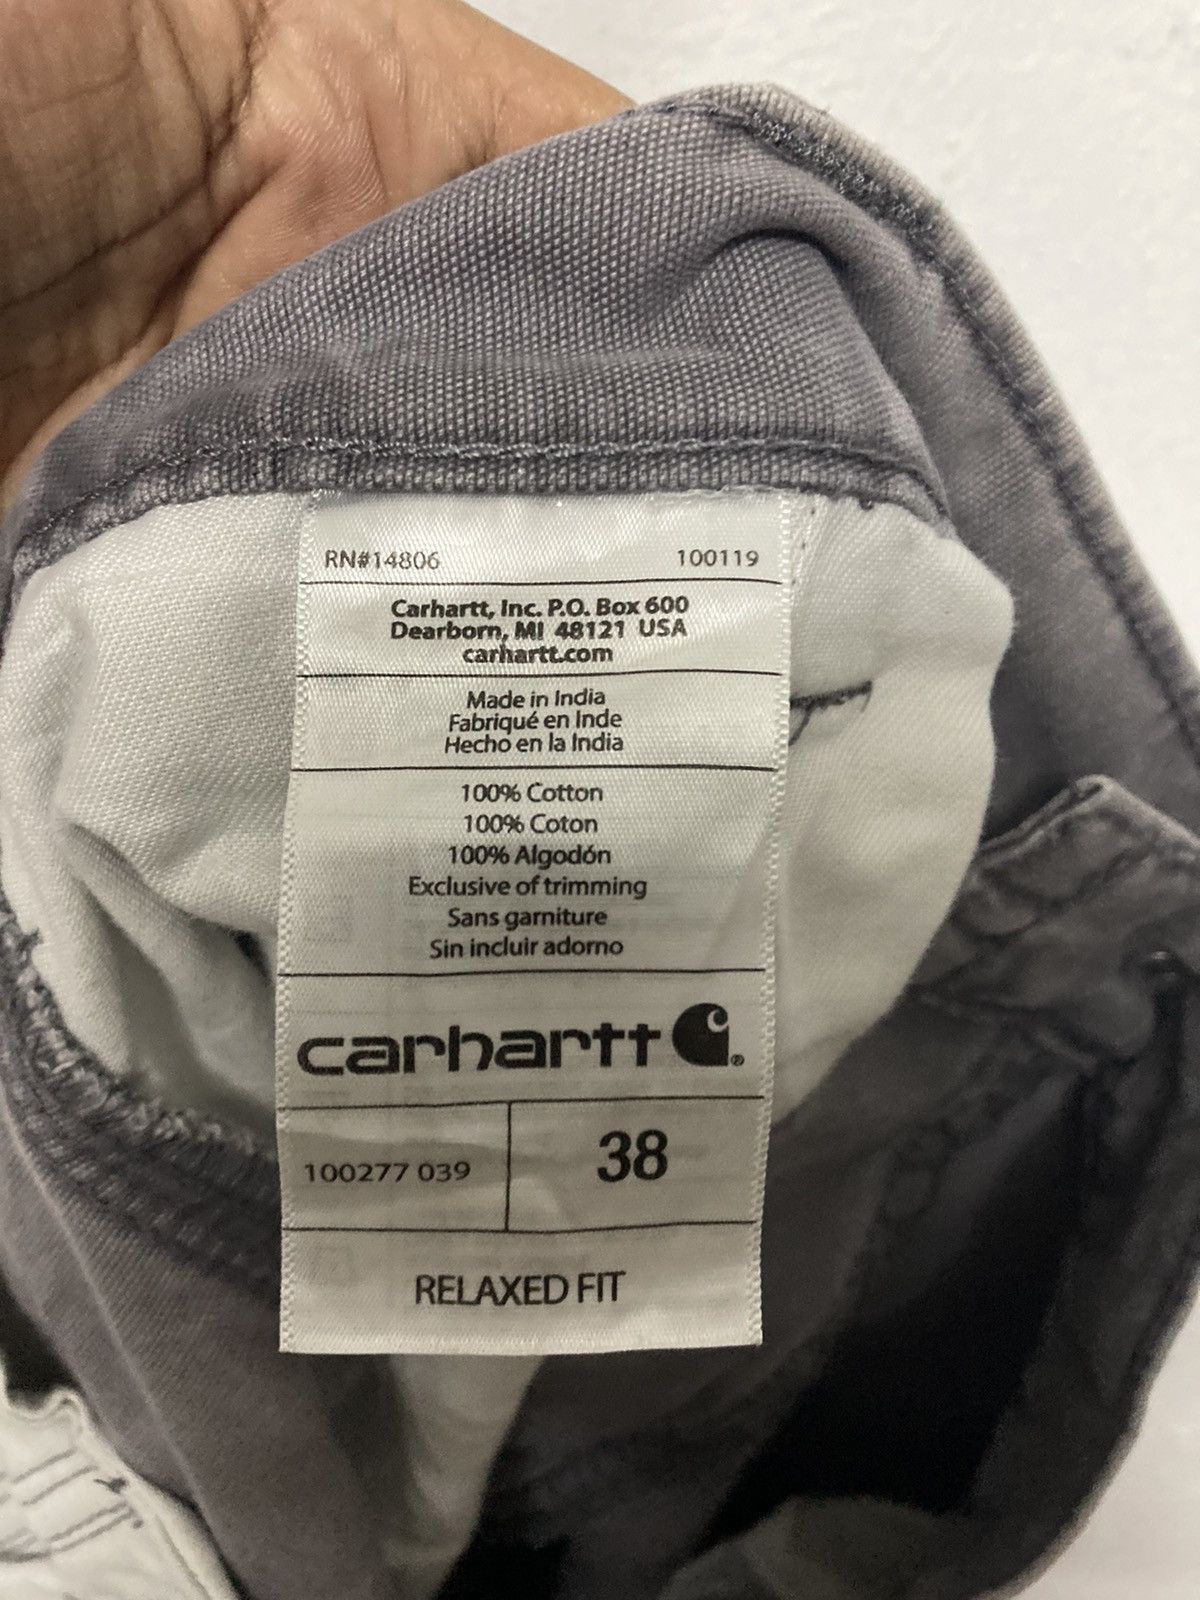 Vintage - Carhatt Relaxed Fit Cargo Short Pant Size 38 - 17